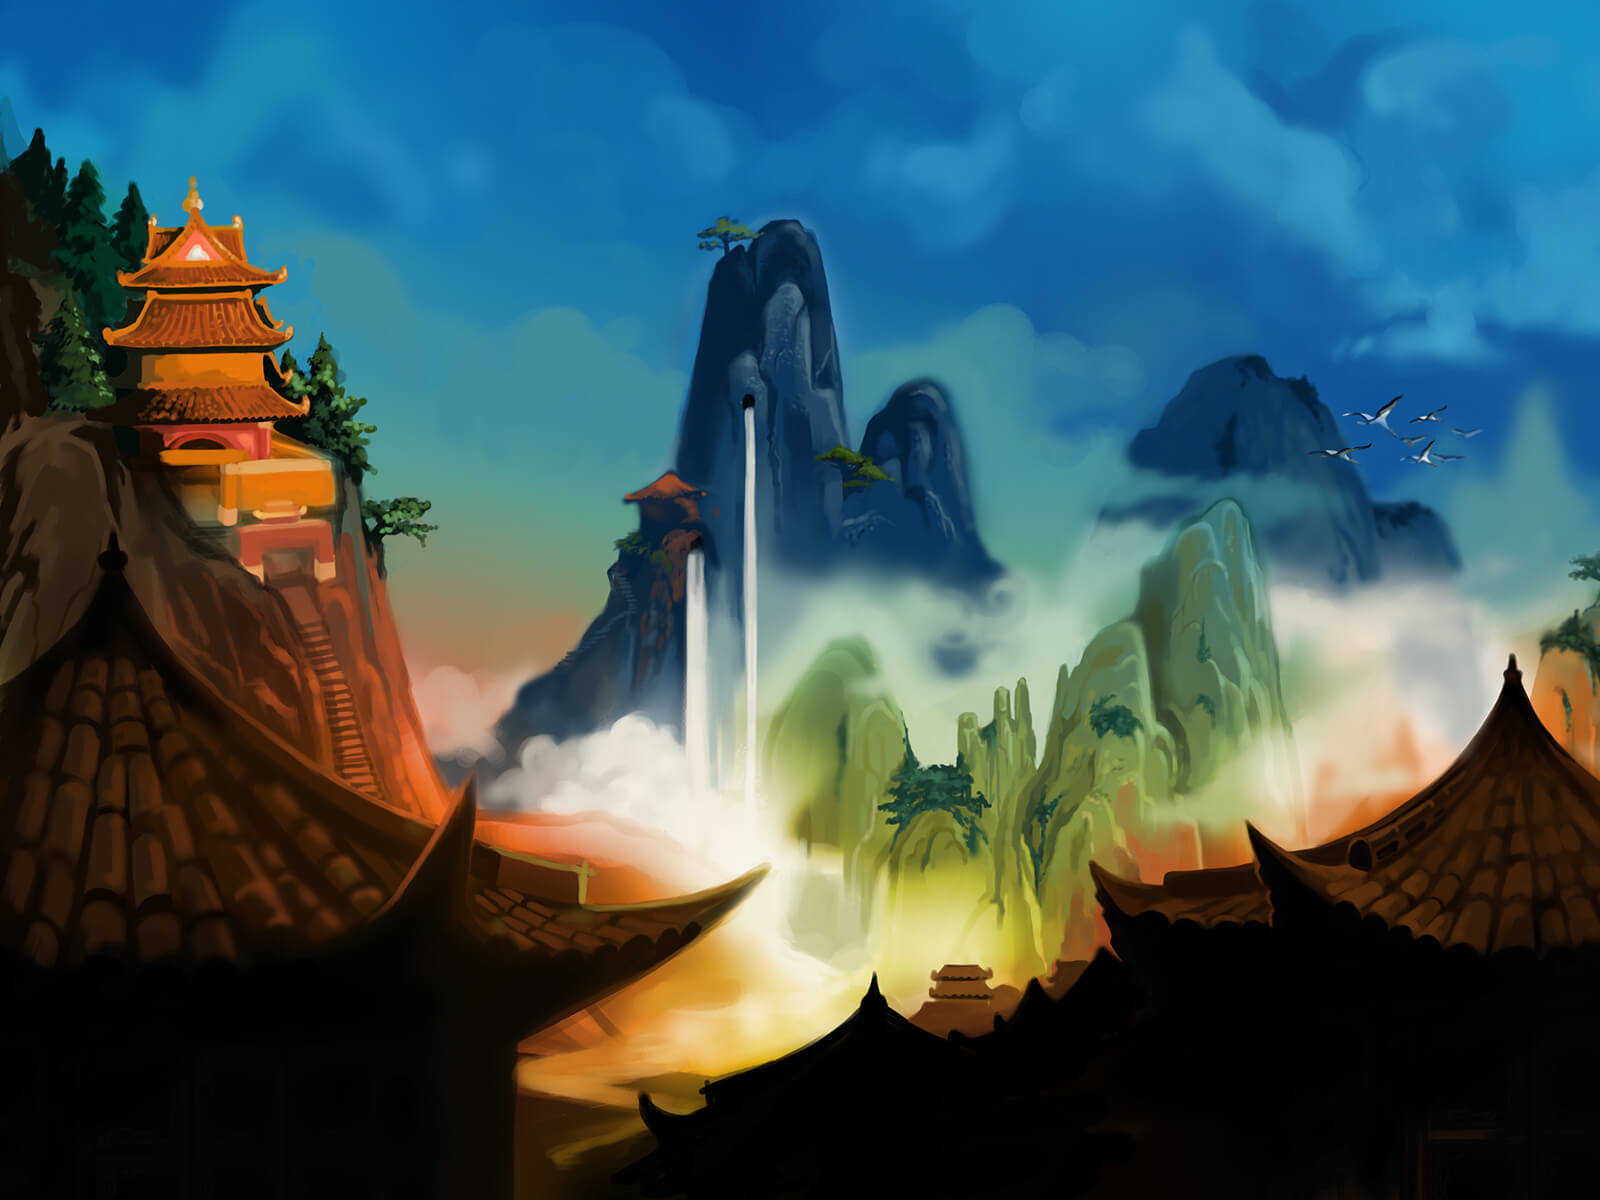 Panoramic landscape of a mountainous region above the clouds. Pagoda-like structures dot various peaks.